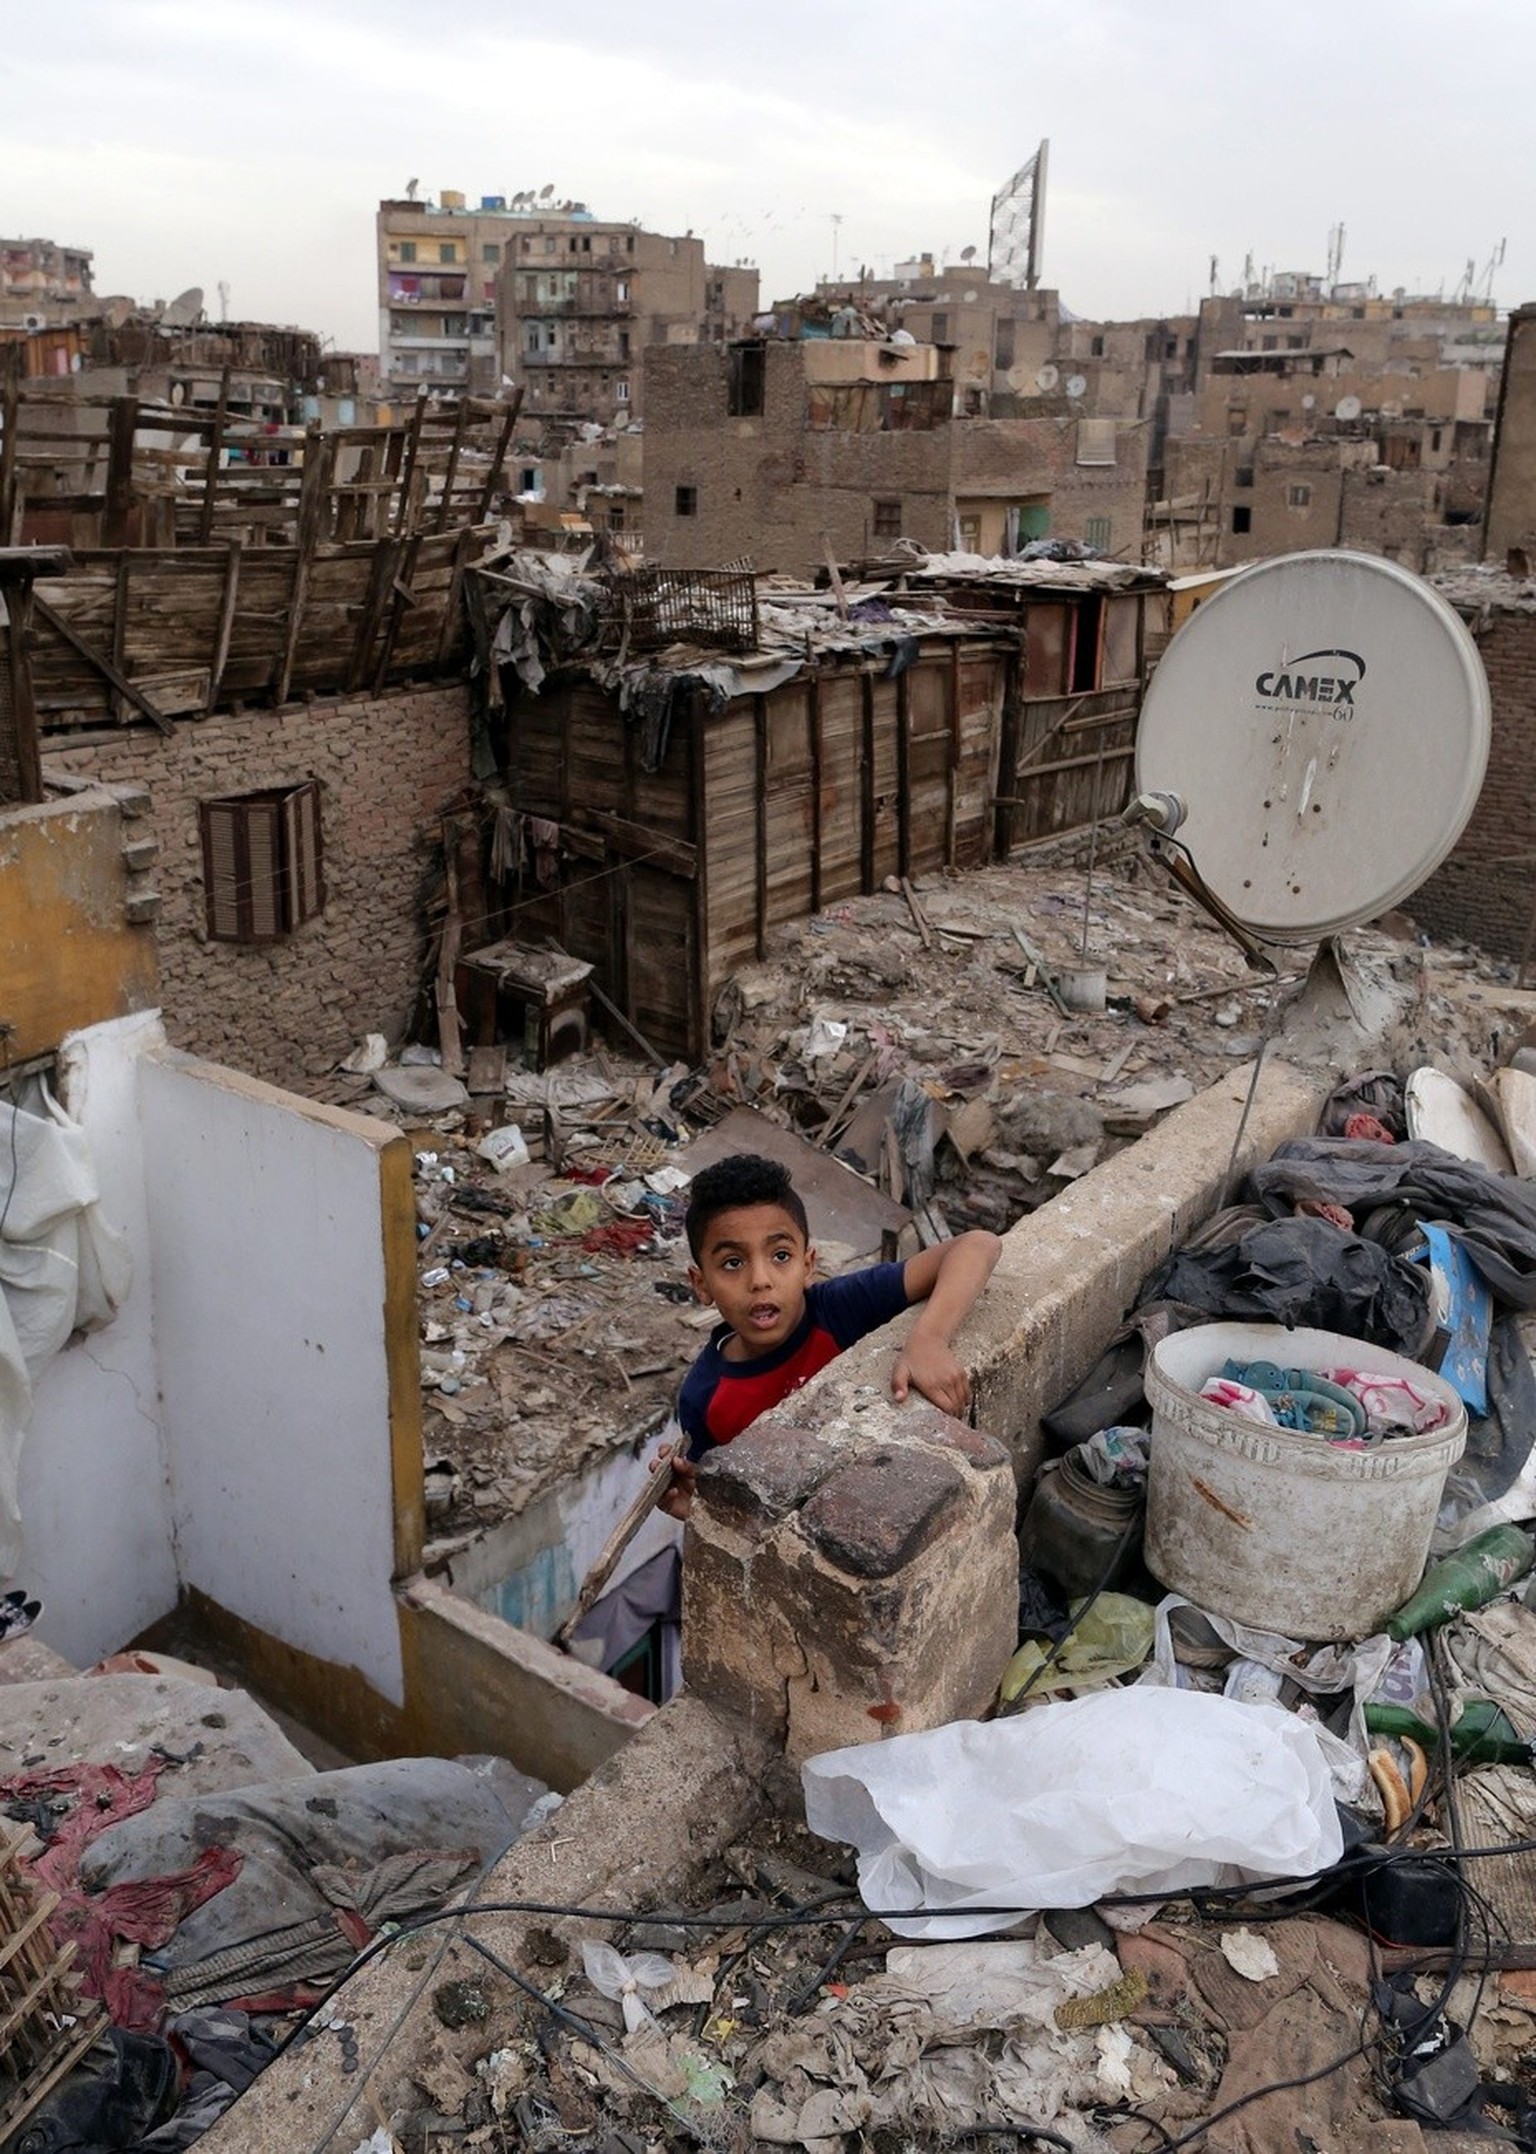 epa04678846 An Egyptian boy plays on the roof of a home at the Bulaq slum in Cairo, Egypt, 25 March 2015. According to estimates, about 16 million Egyptians live in slum neighborhoods lacking basic fa ...